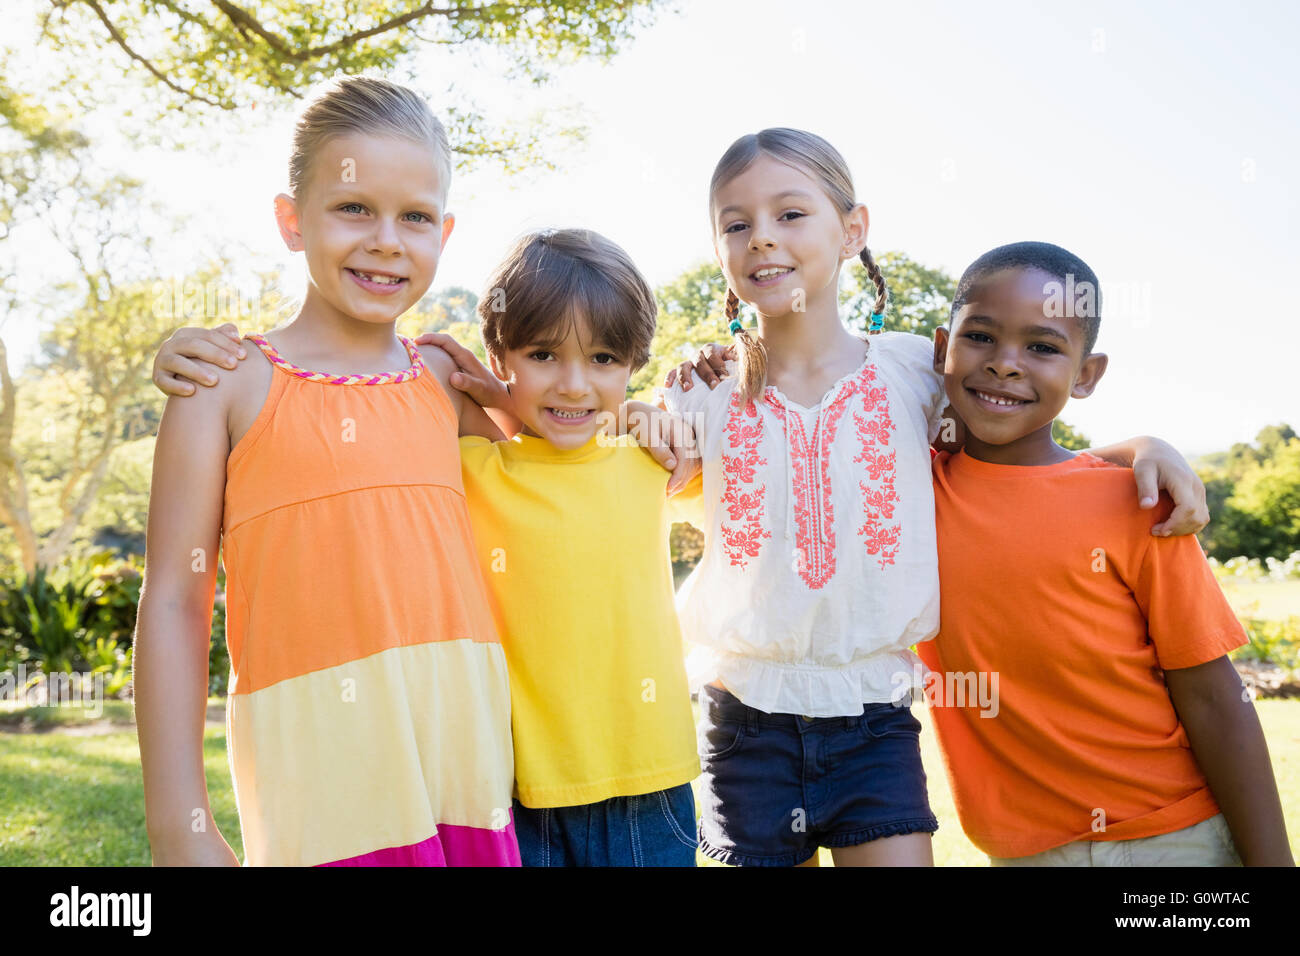 Children standing and posing for camera Stock Photo